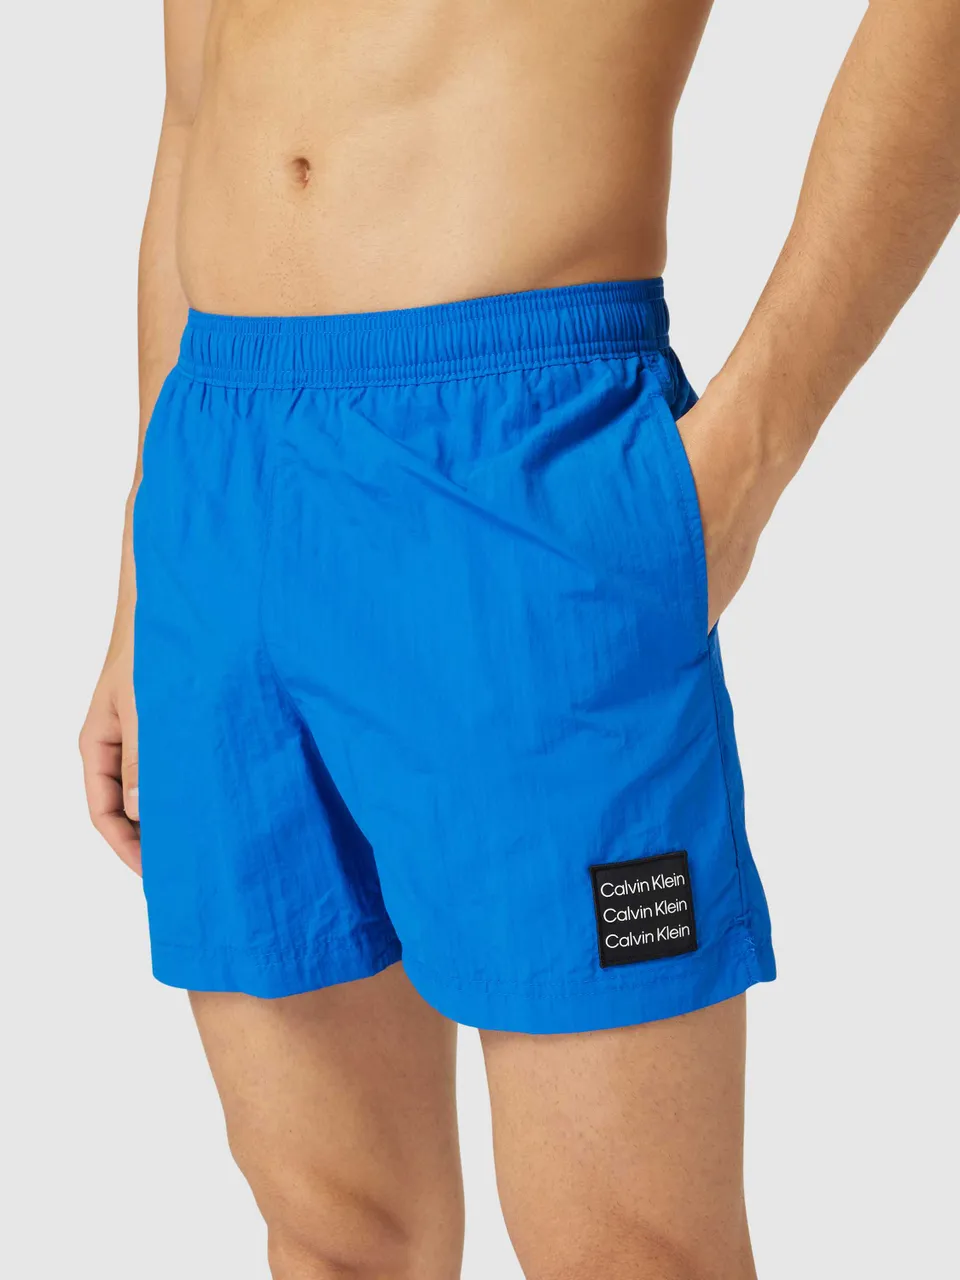 Badehose mit Label-Patch